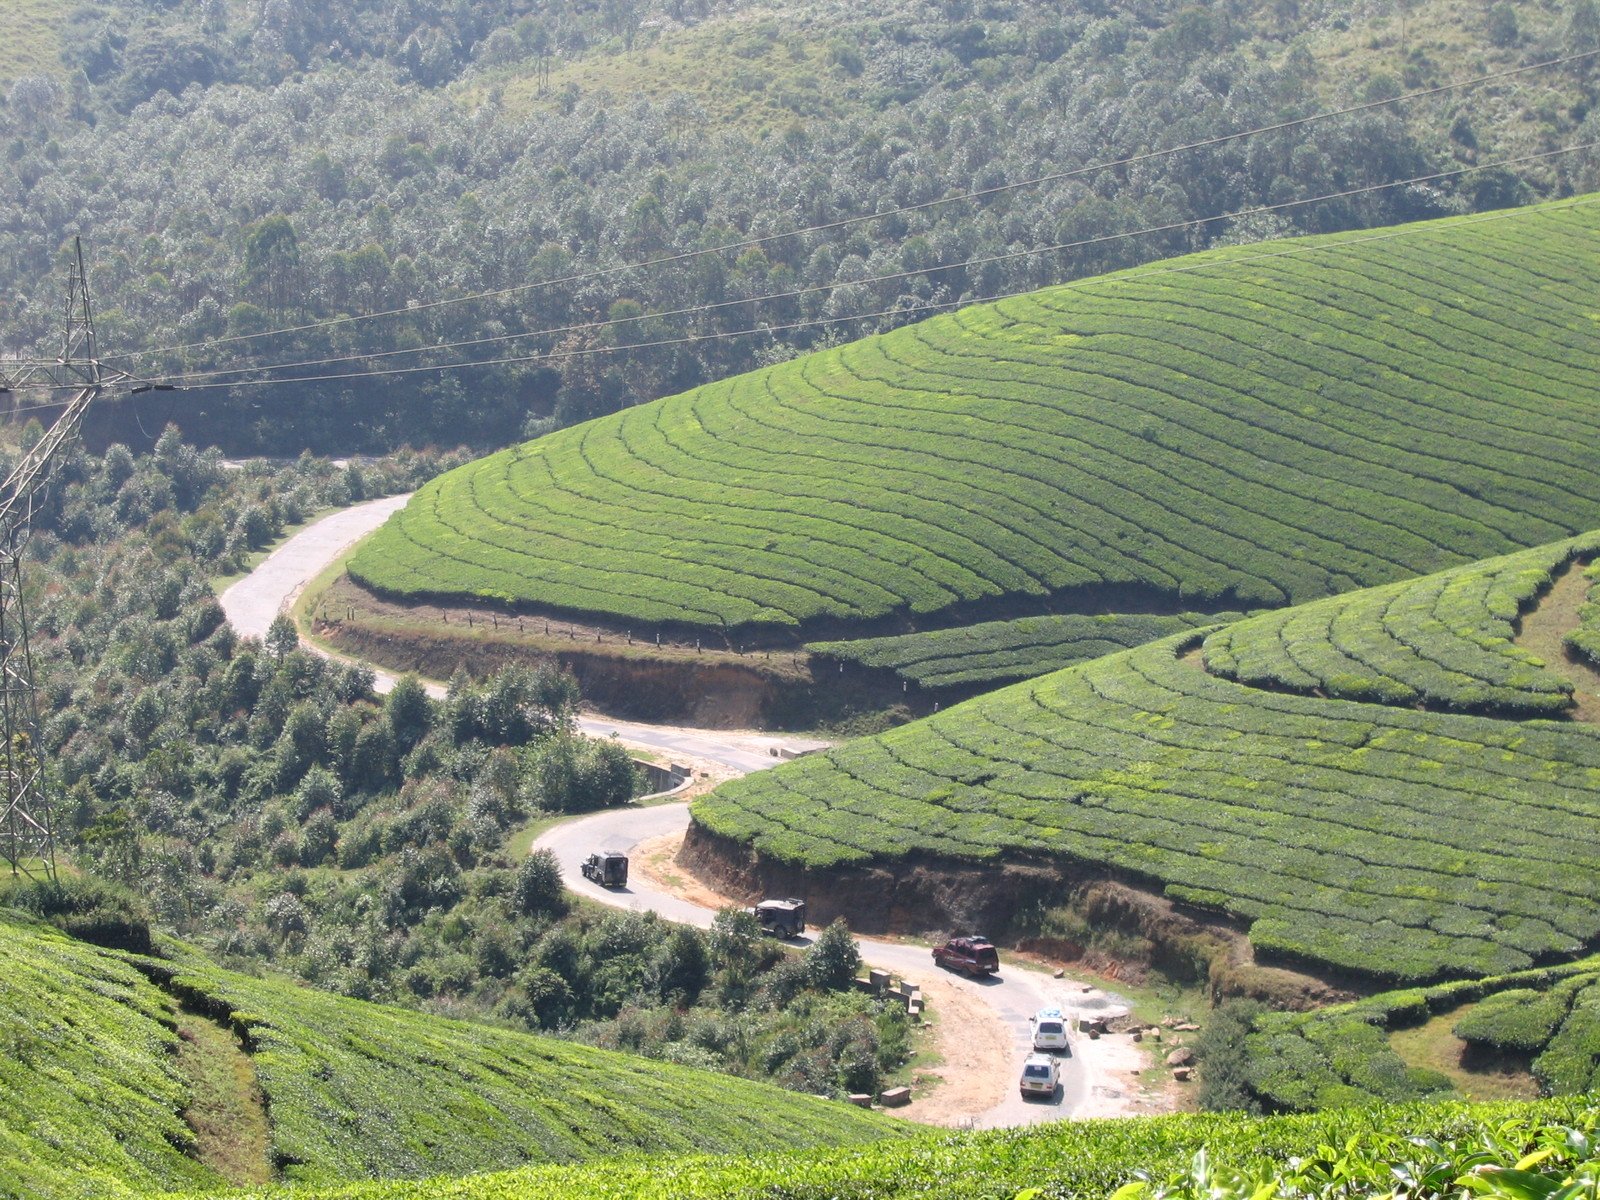 the roads are winding up into a tea estate